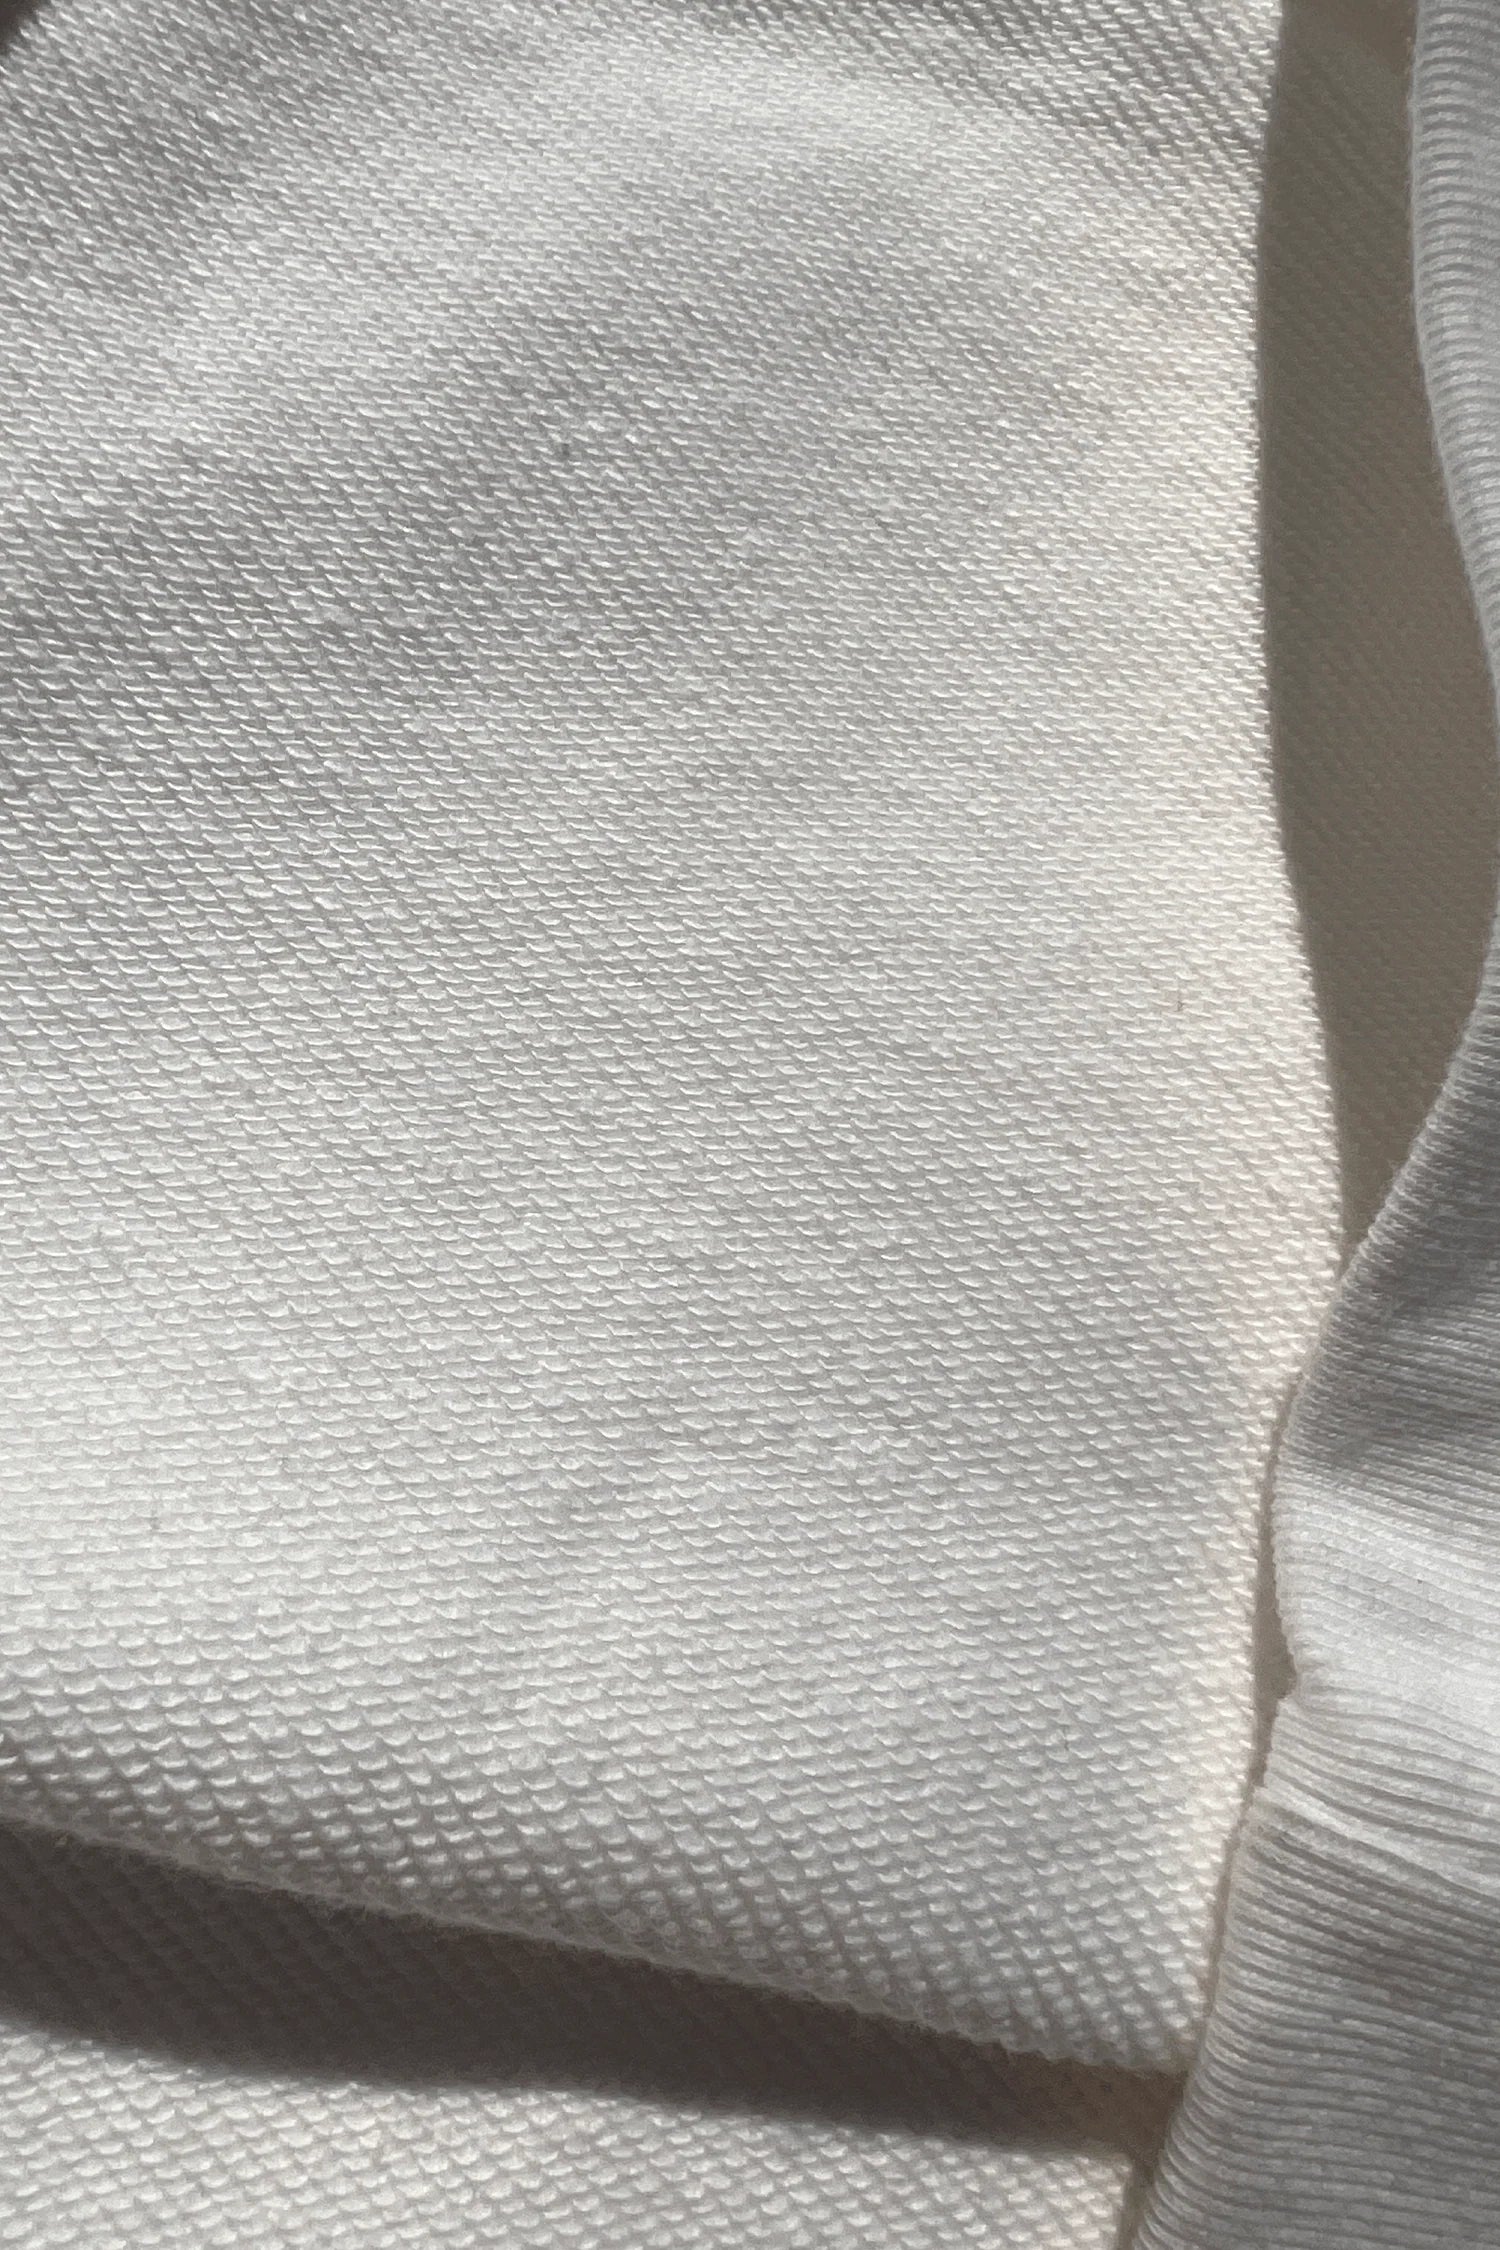 Close-up of a textured Better not organic cotton fabric with shadows and sunlight creating a pattern.